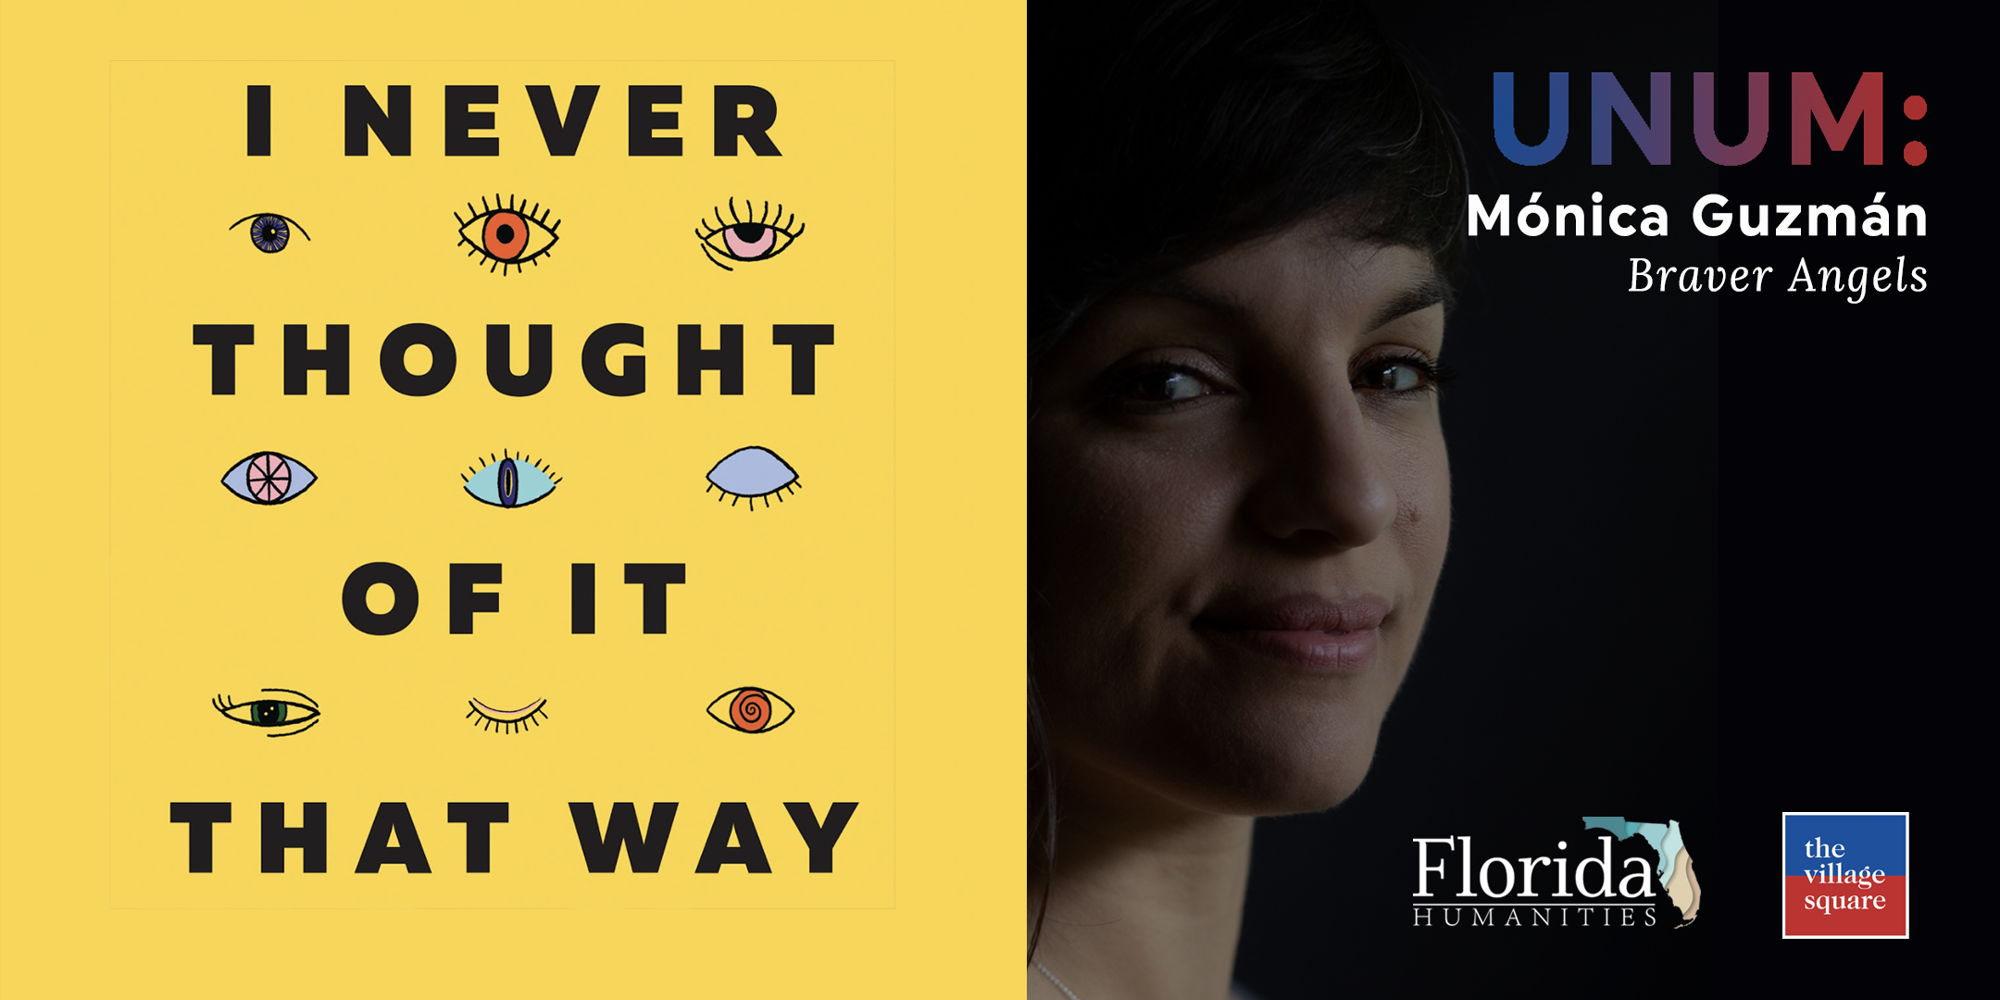 Monica Guzman: "I Never Thought of It That Way" promotional image